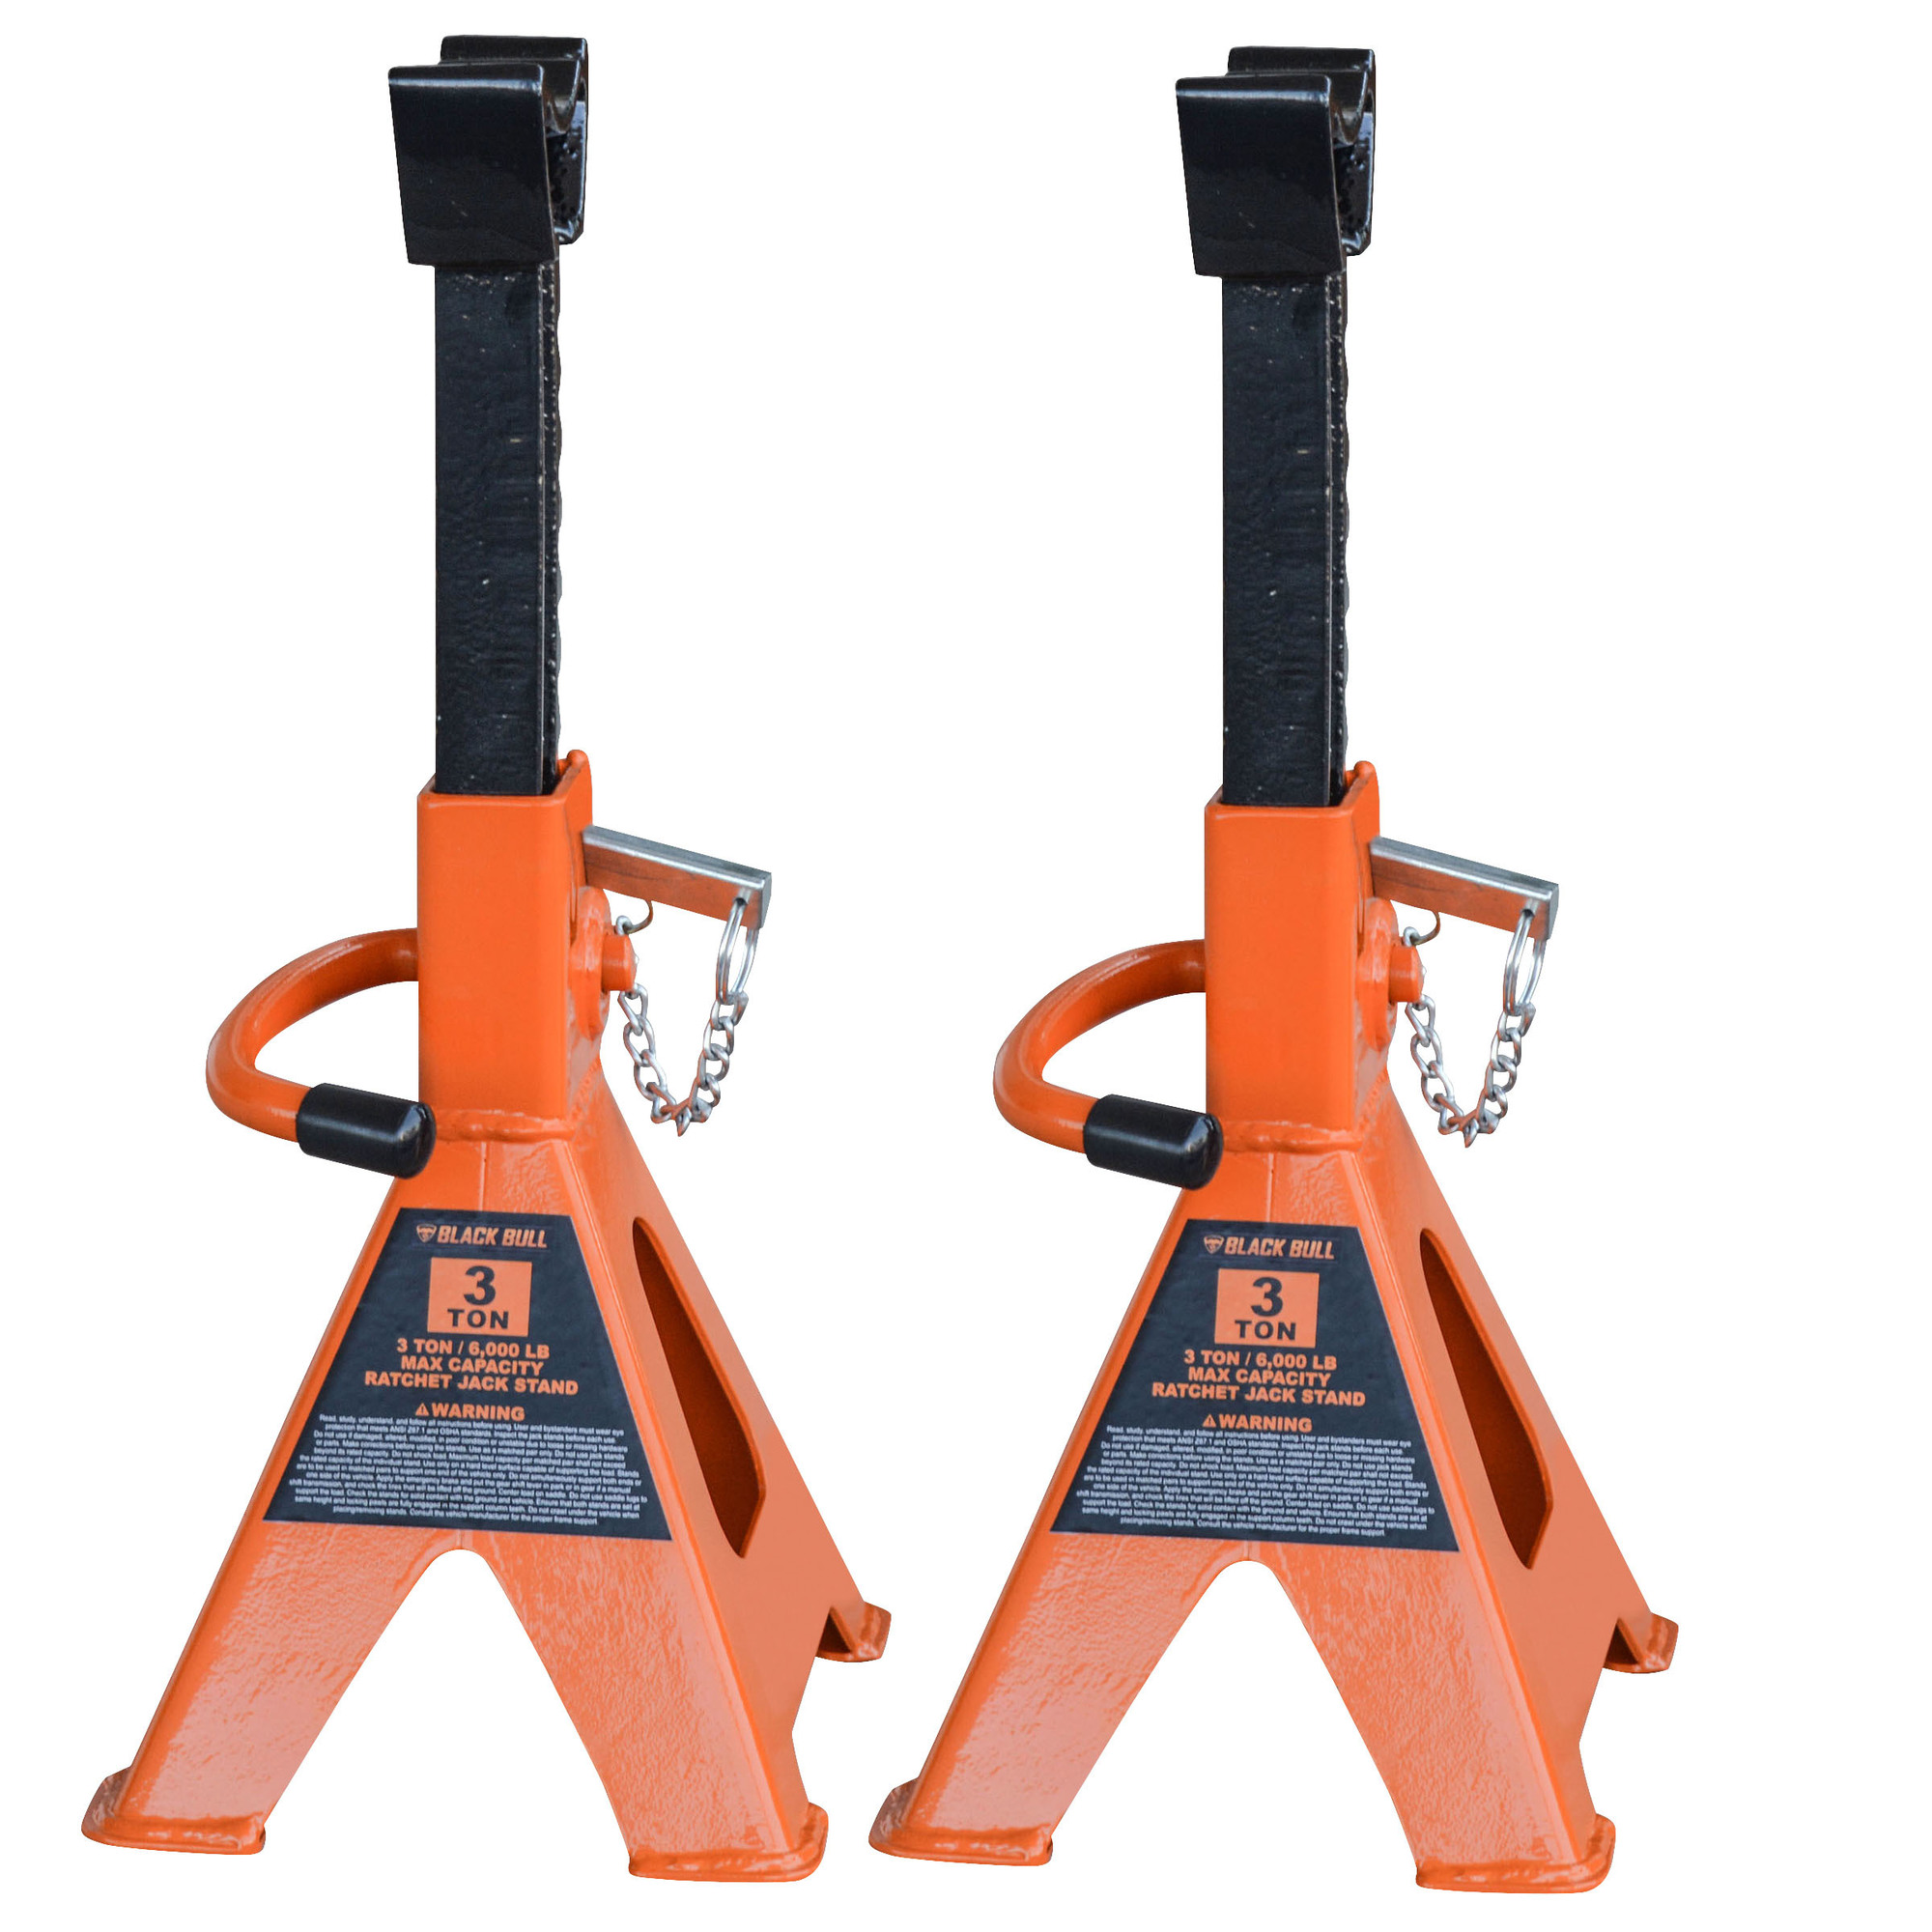 Buffalo Tools, 3 Ton Jack Stand Set (2pk), Lift Capacity 3 Tons, Max. Lift Height 16 in, MInch Lift Height 11.25 in, Model JS3SET